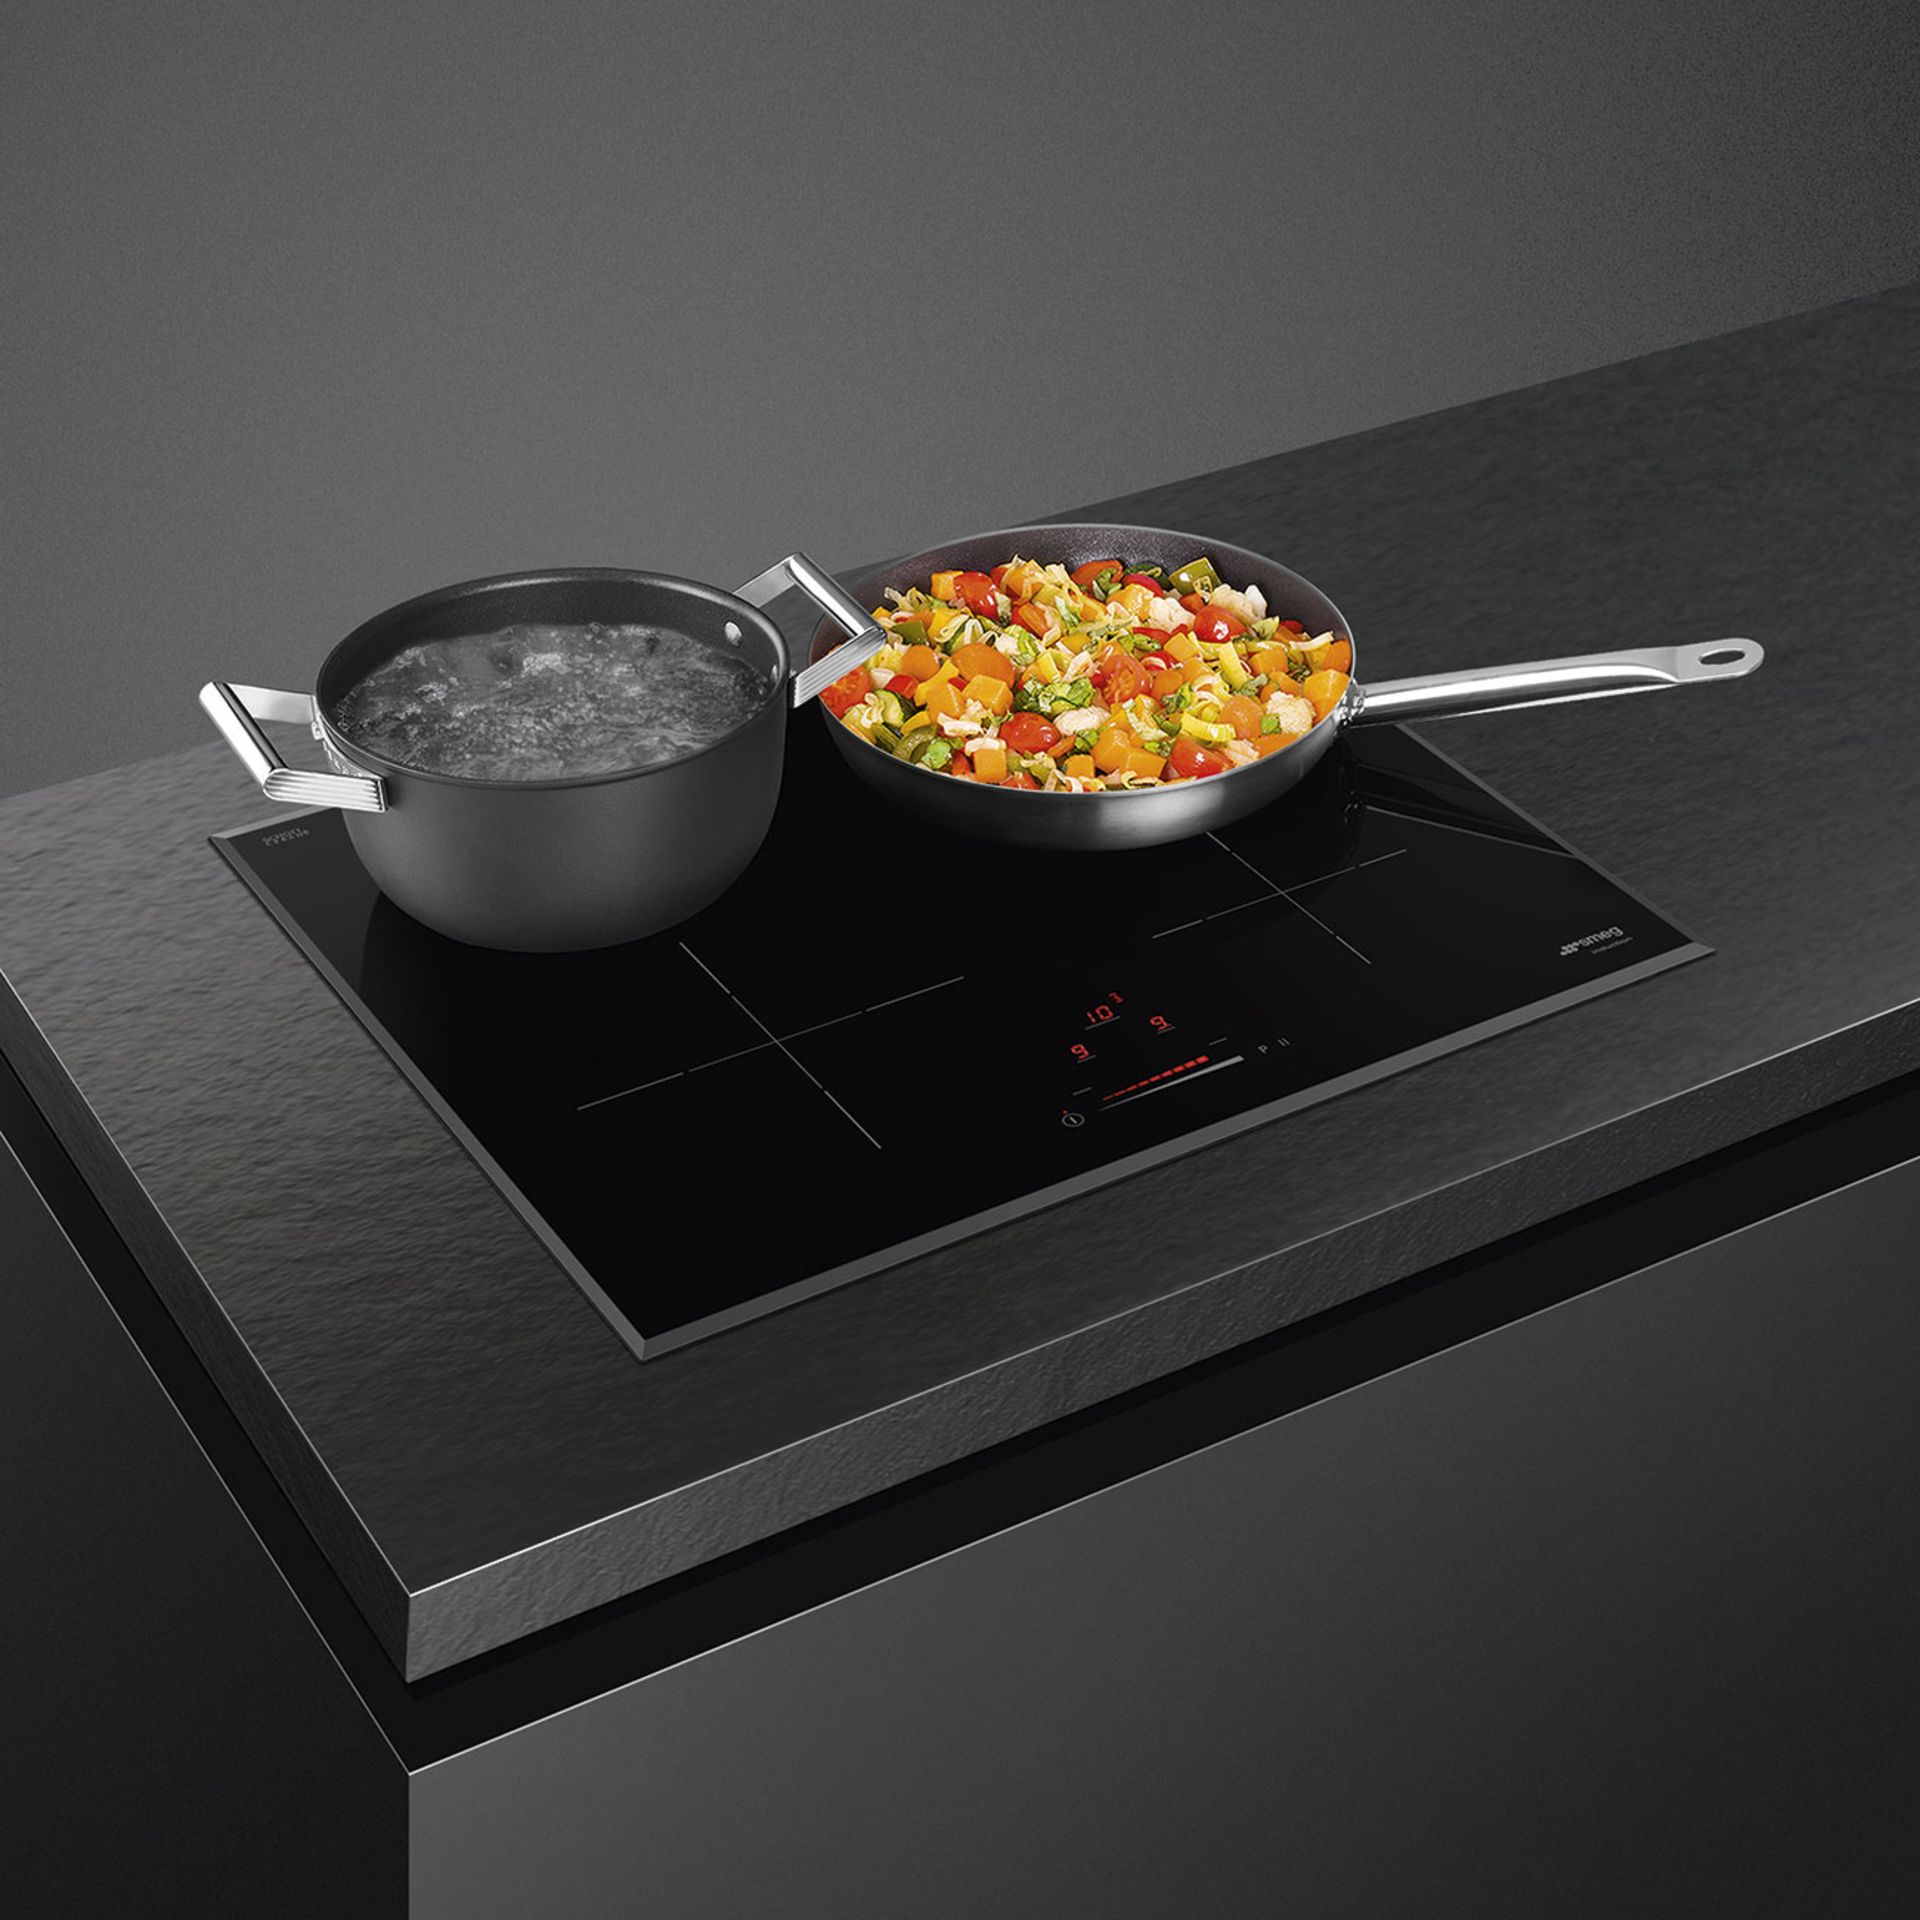 Current Online Price £549. Smeg Universal 4 Zone 60cm Induction Hob SI4642B.